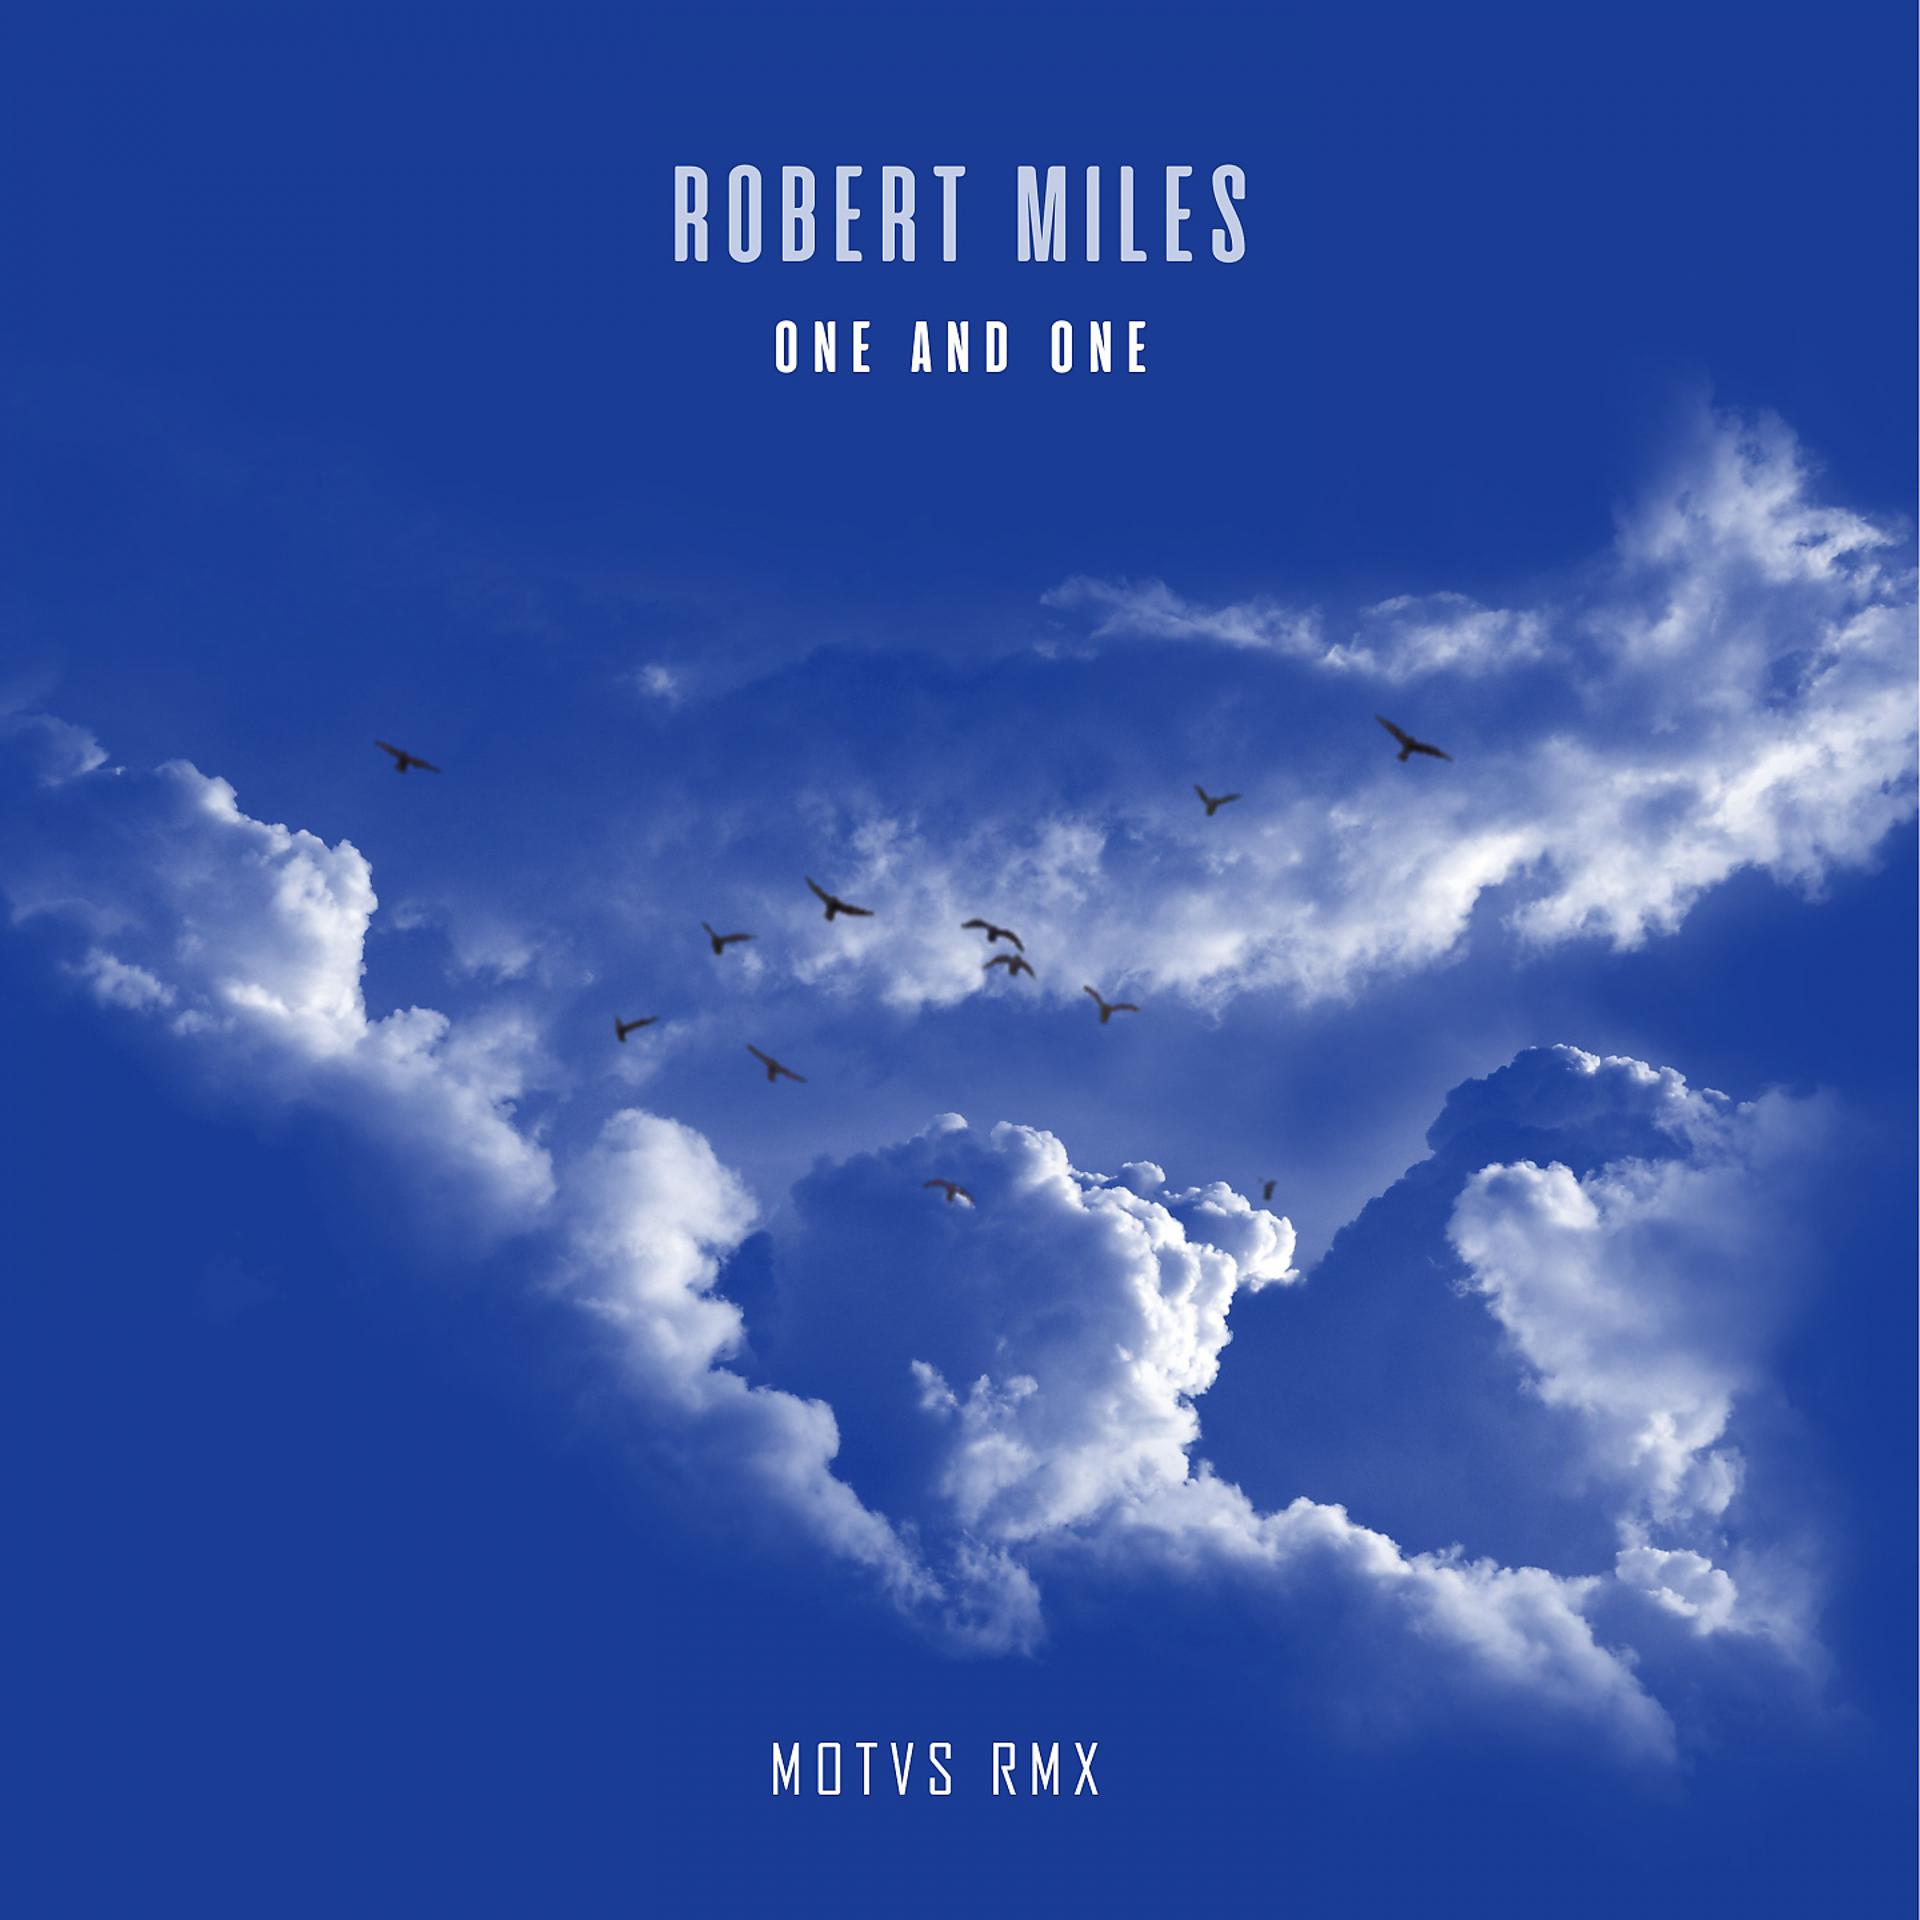 Miles maria. Robert Miles one and one. Robert Miles - Dreamland. Robert Miles - one and one (MOTVS. Robert Miles альбомы.